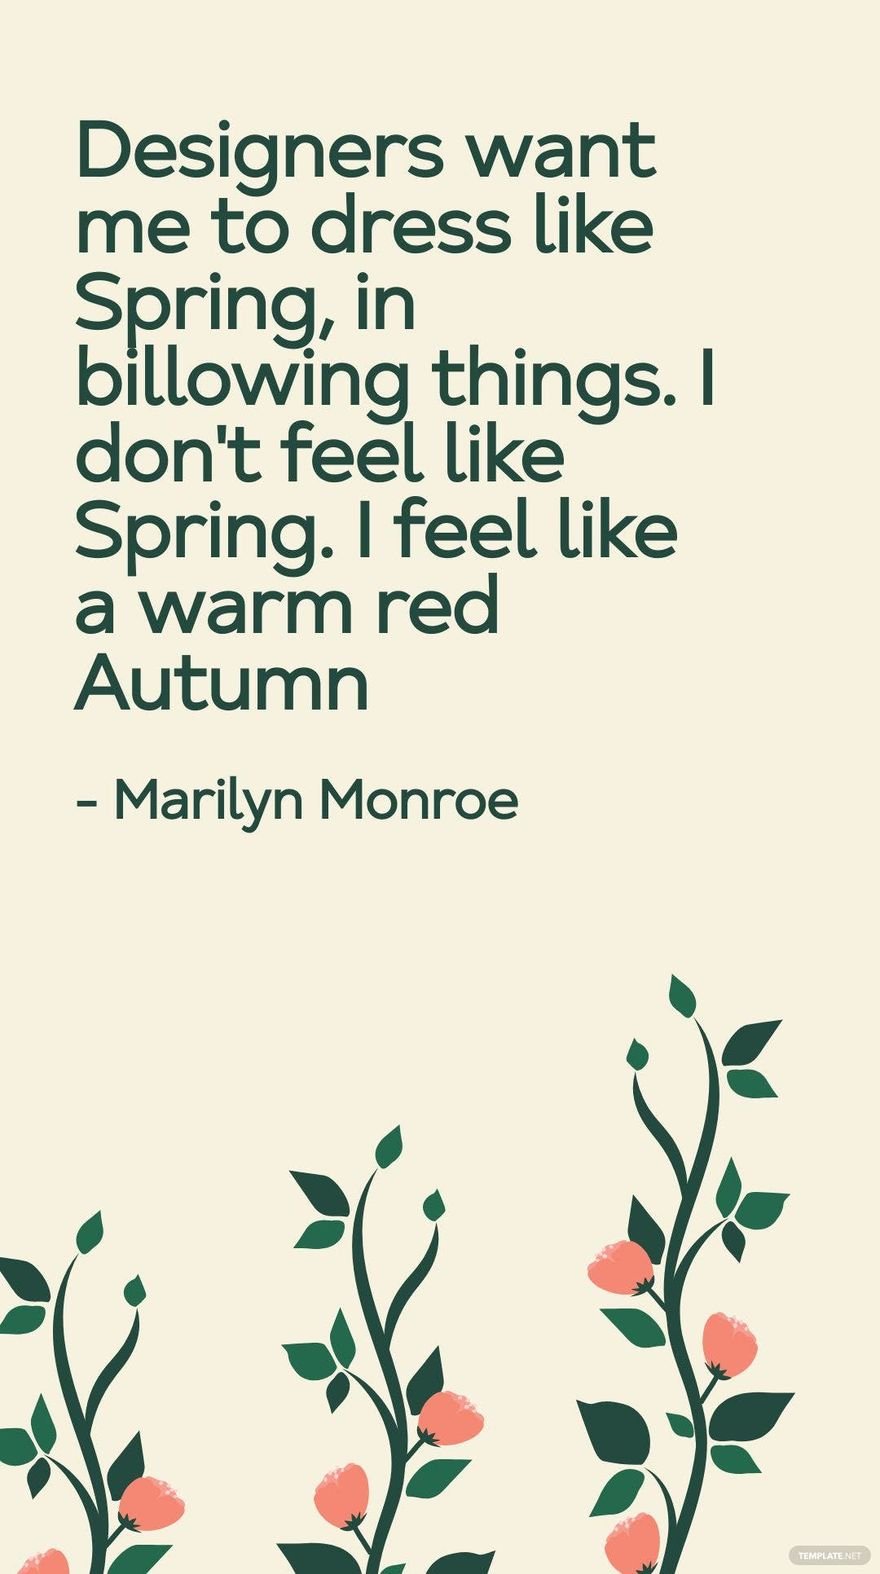 Marilyn Monroe - Designers want me to dress like Spring, in billowing things. I don't feel like Spring. I feel like a warm red Autumn